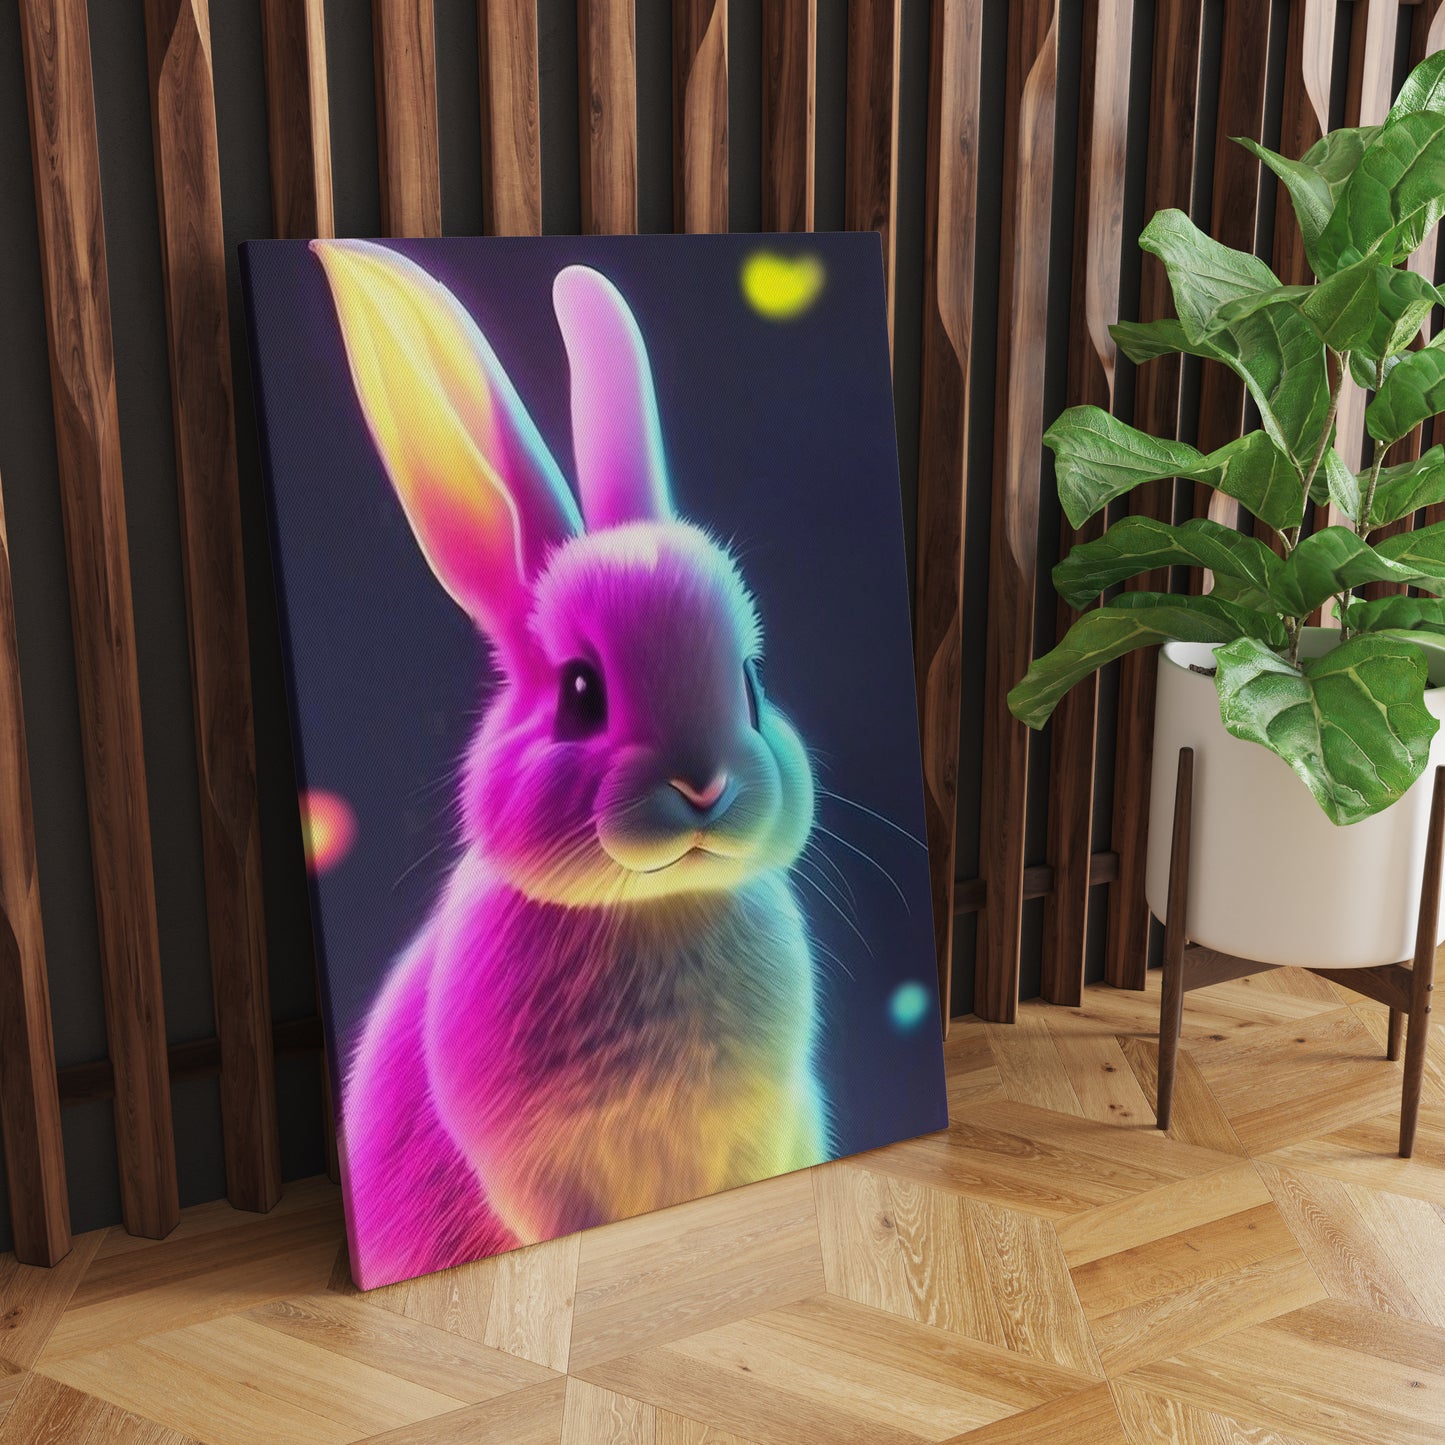 Luminous Playfulness: Neon Glowing Rabbits - Captivating Wall Art Celebrating the Whimsical Charm and Radiant Glow of Playful Bunnies - S06E17